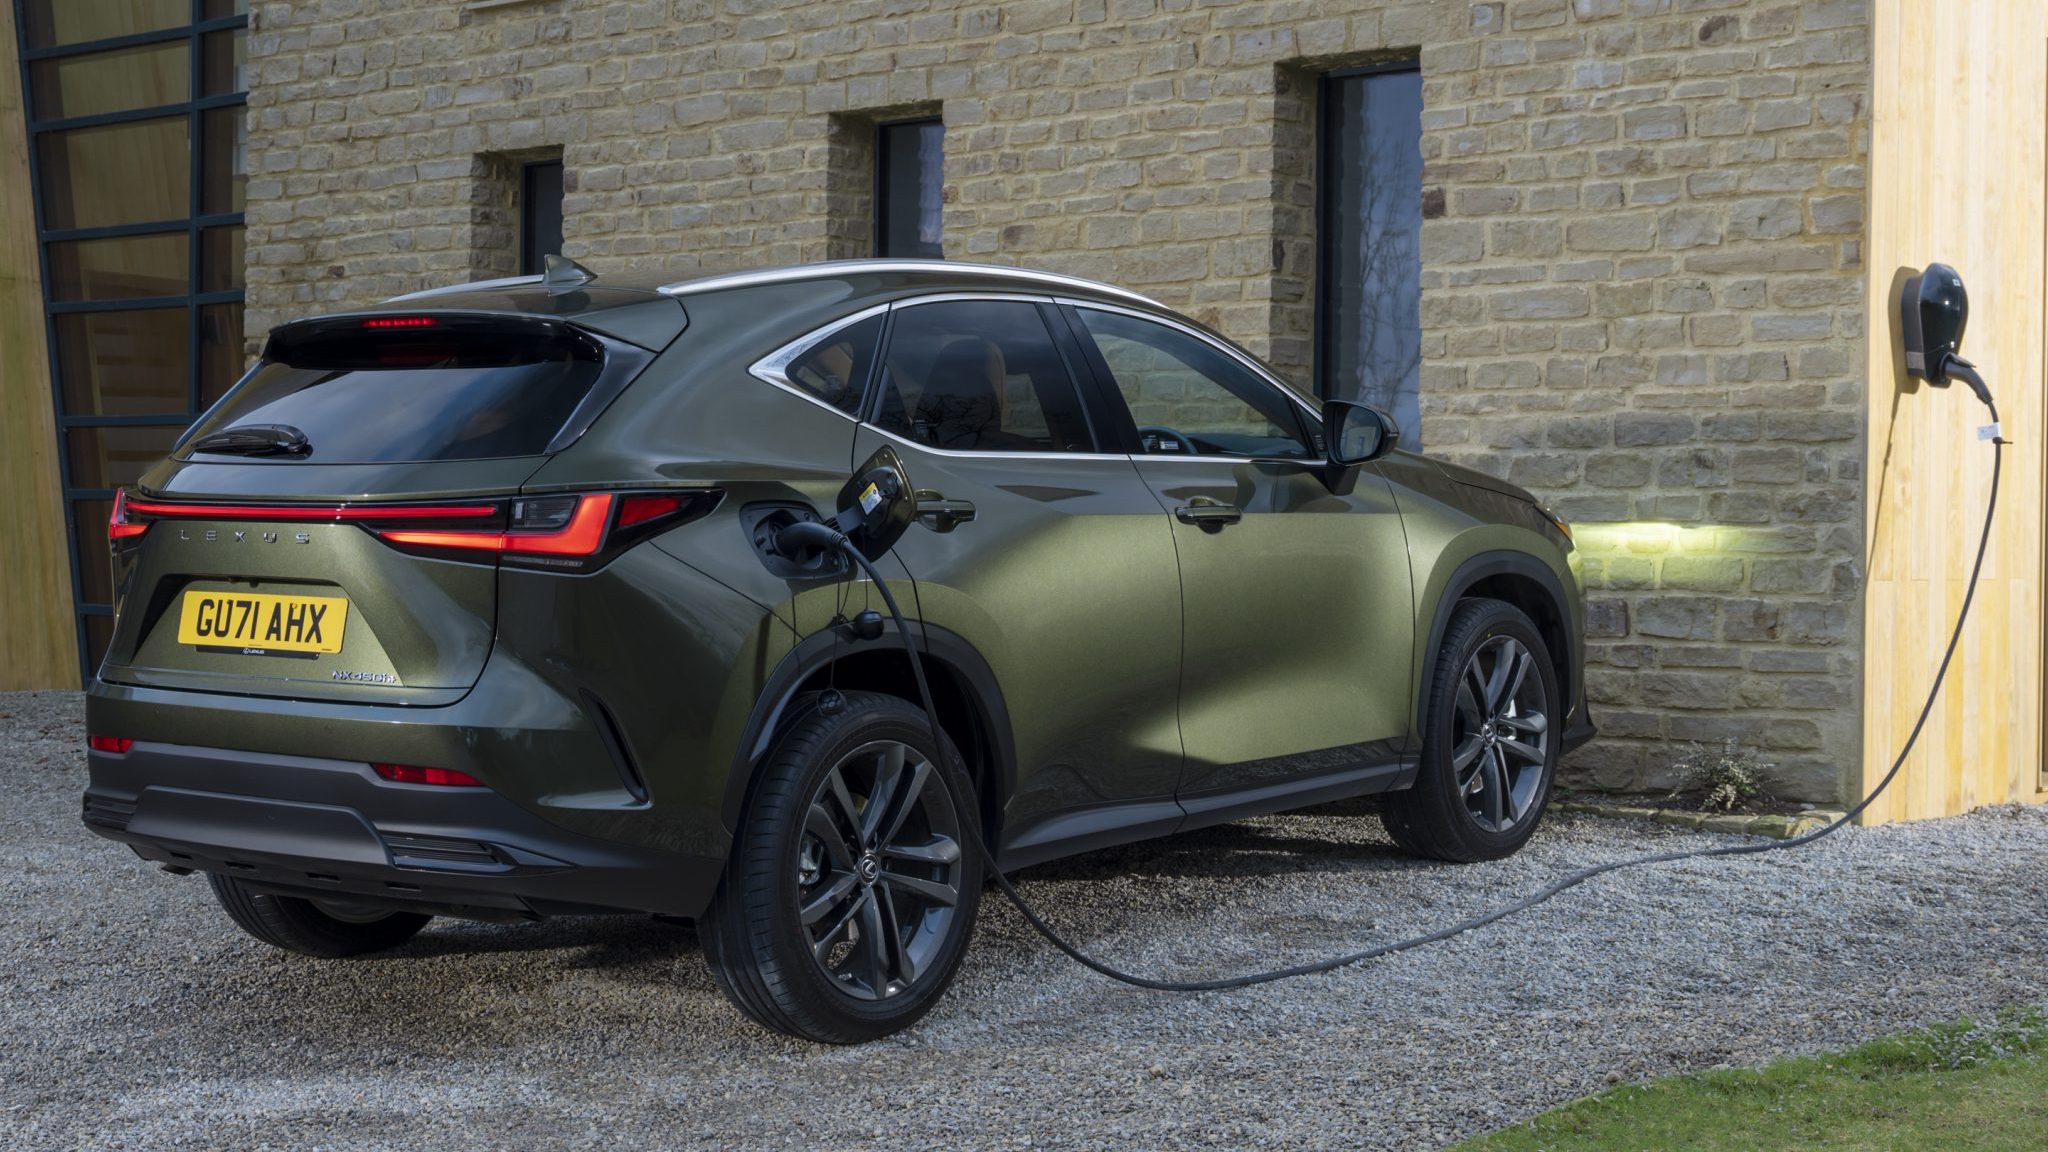 jeremy clarkson, phev, jeremy clarkson calls lexus nx plug-in hybrid an 'affront' to cars in classic rant